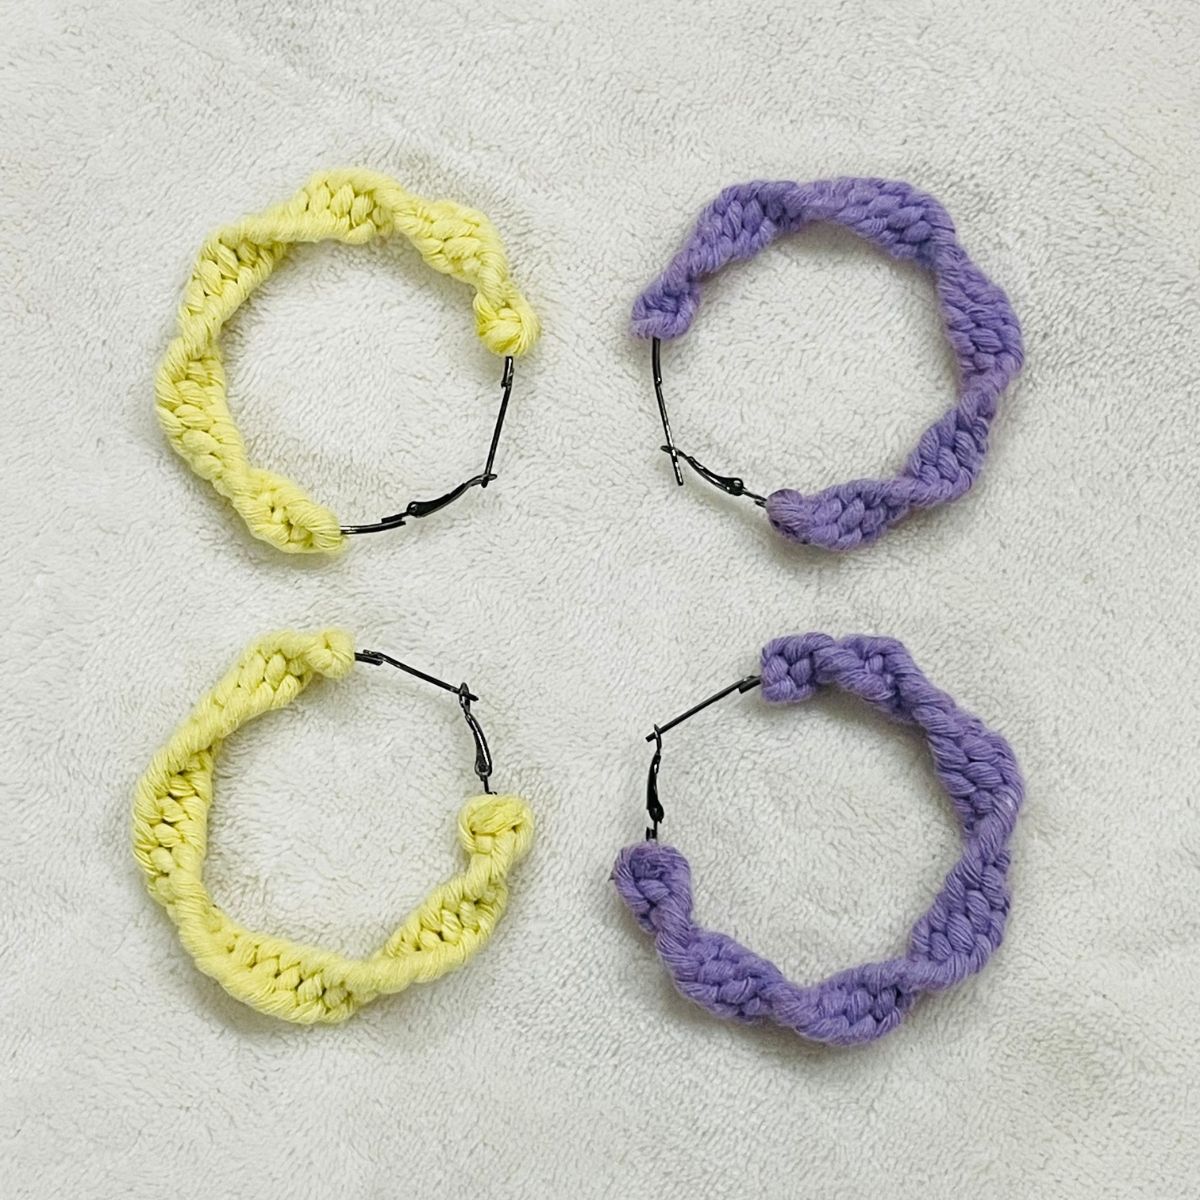 Yellow and Purple Macrame hoop earrings online india wholesale handmade gifts for her valentine's day birthday bridesmaid mothers day gift affordable gifts under 350 online